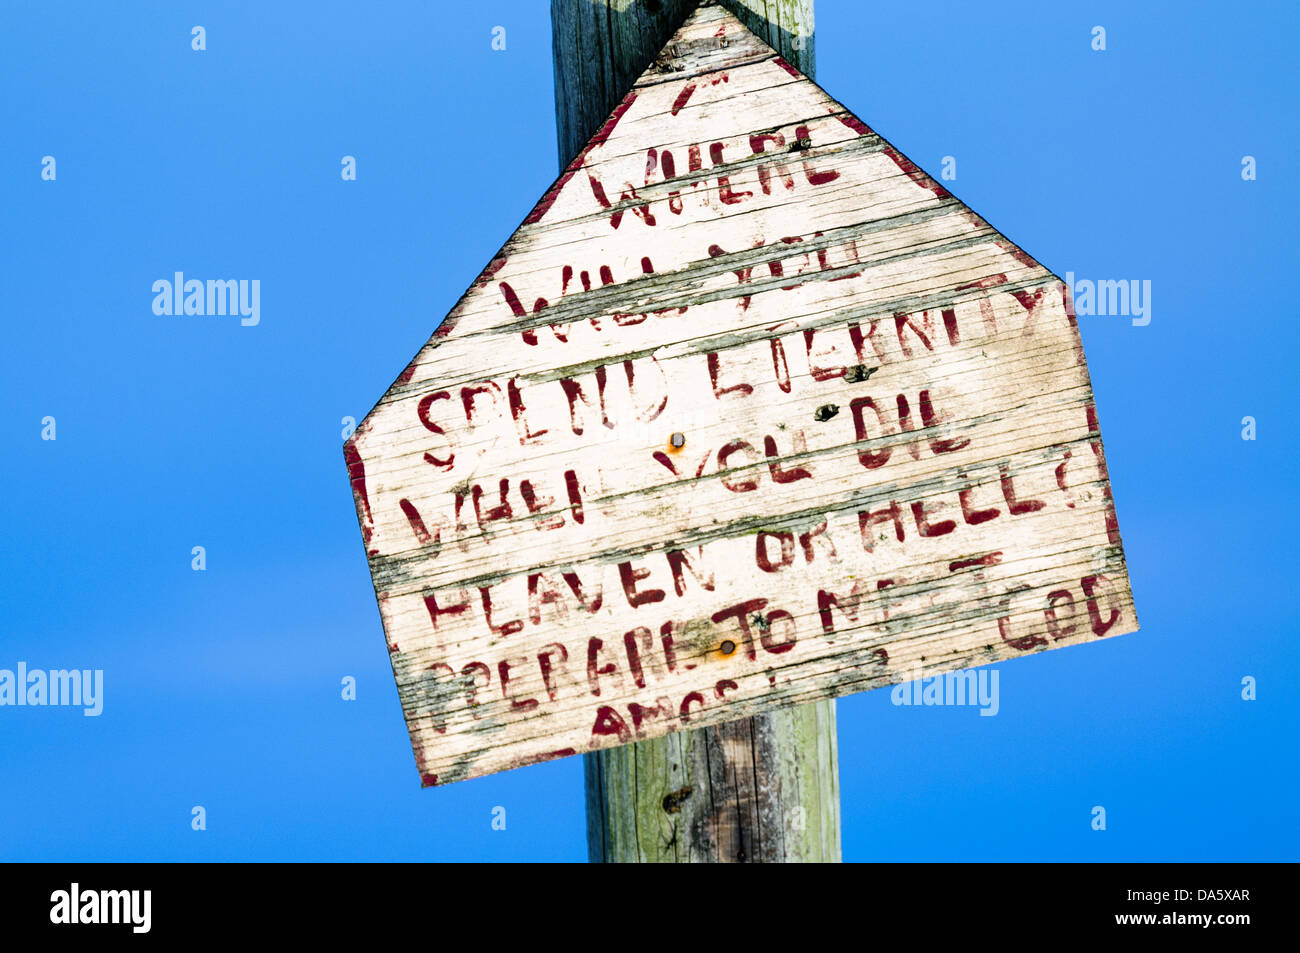 Sign on a lampost with hand-written message typical of many signs found in rural parts of Northern Ireland Stock Photo